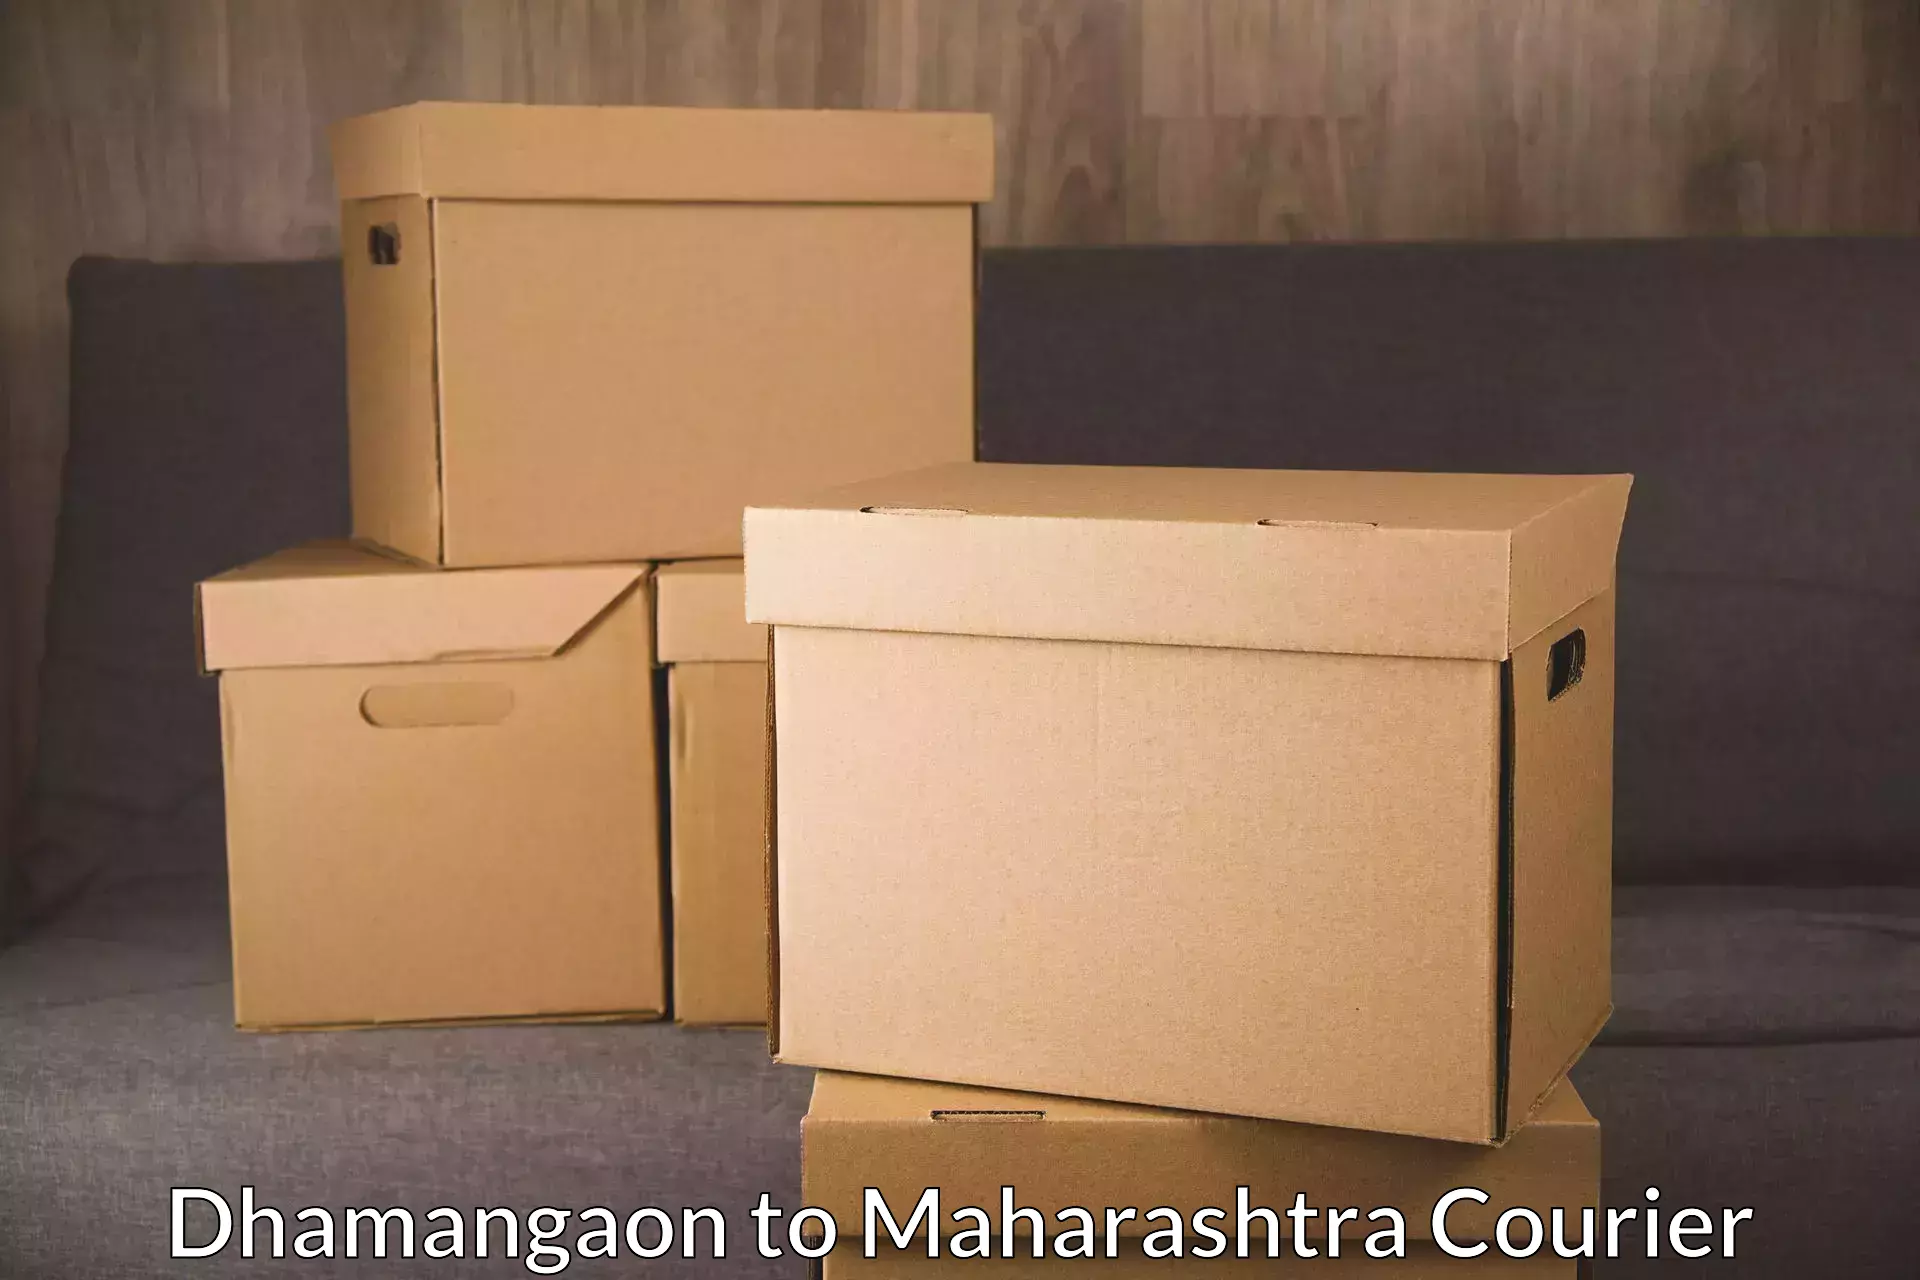 Efficient package consolidation Dhamangaon to Pune